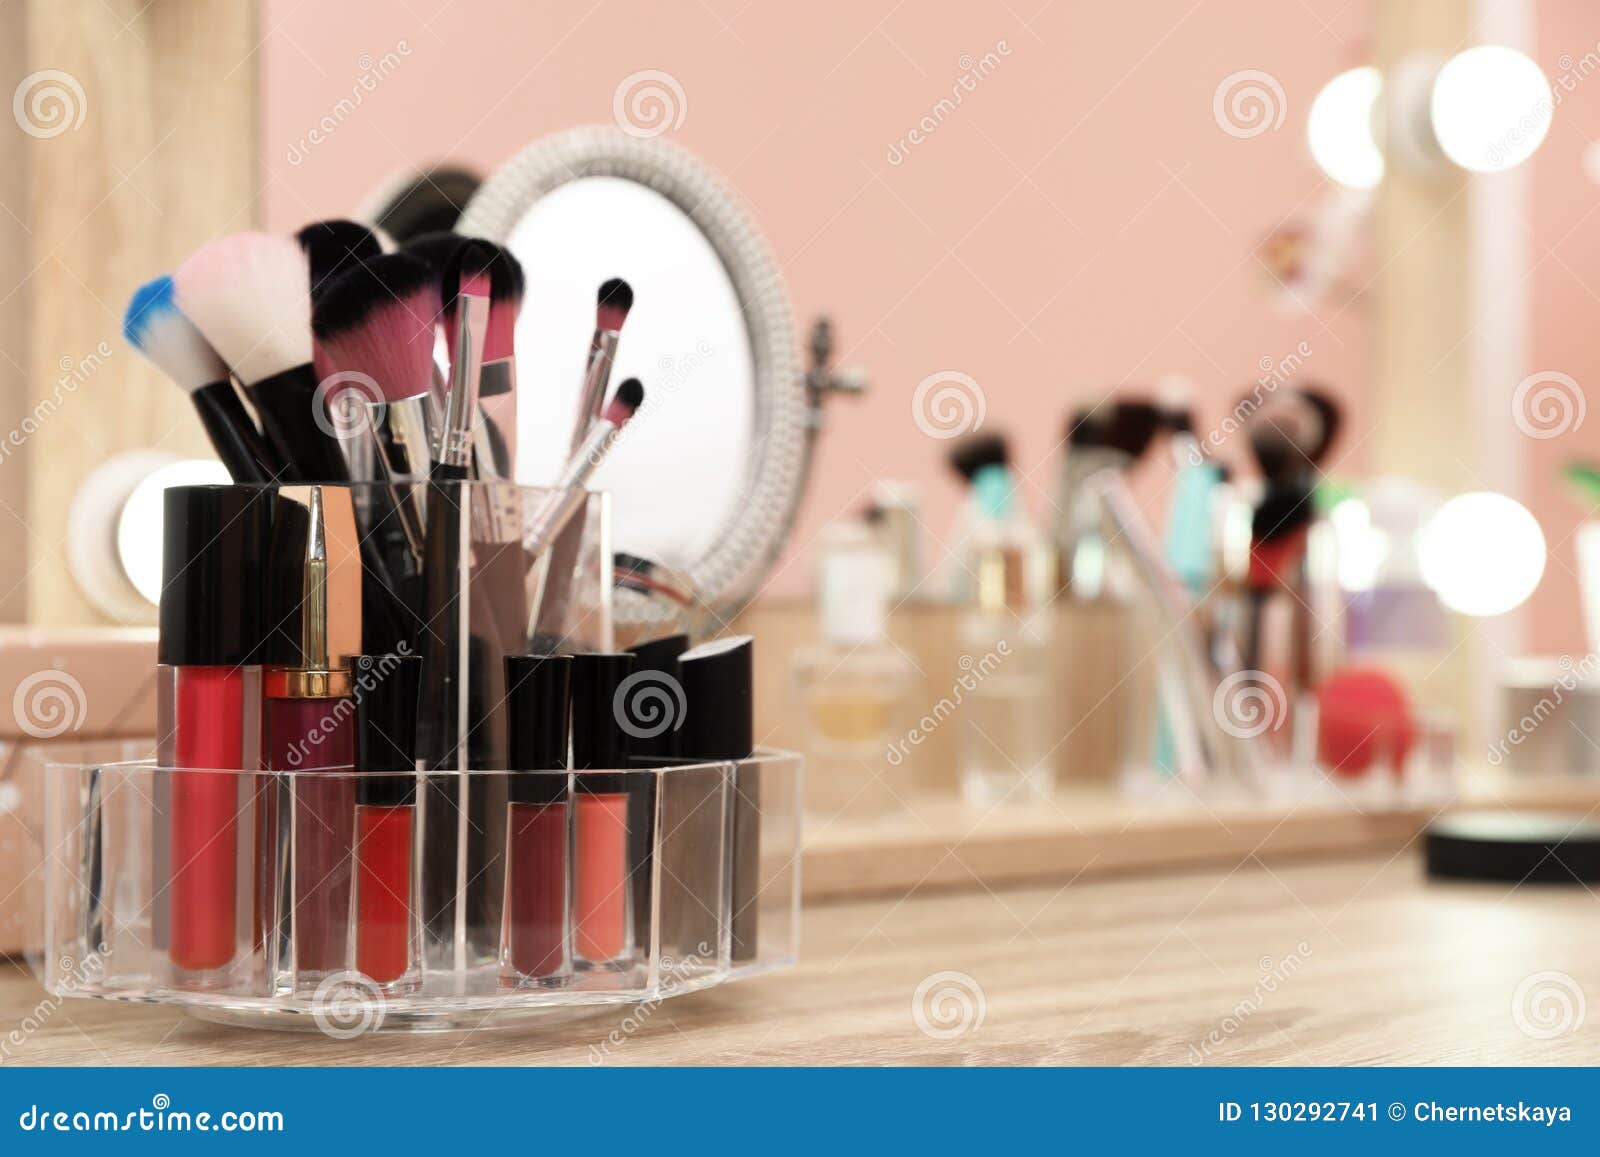 Organizer With Cosmetic Products For Makeup On Table Near Mirror